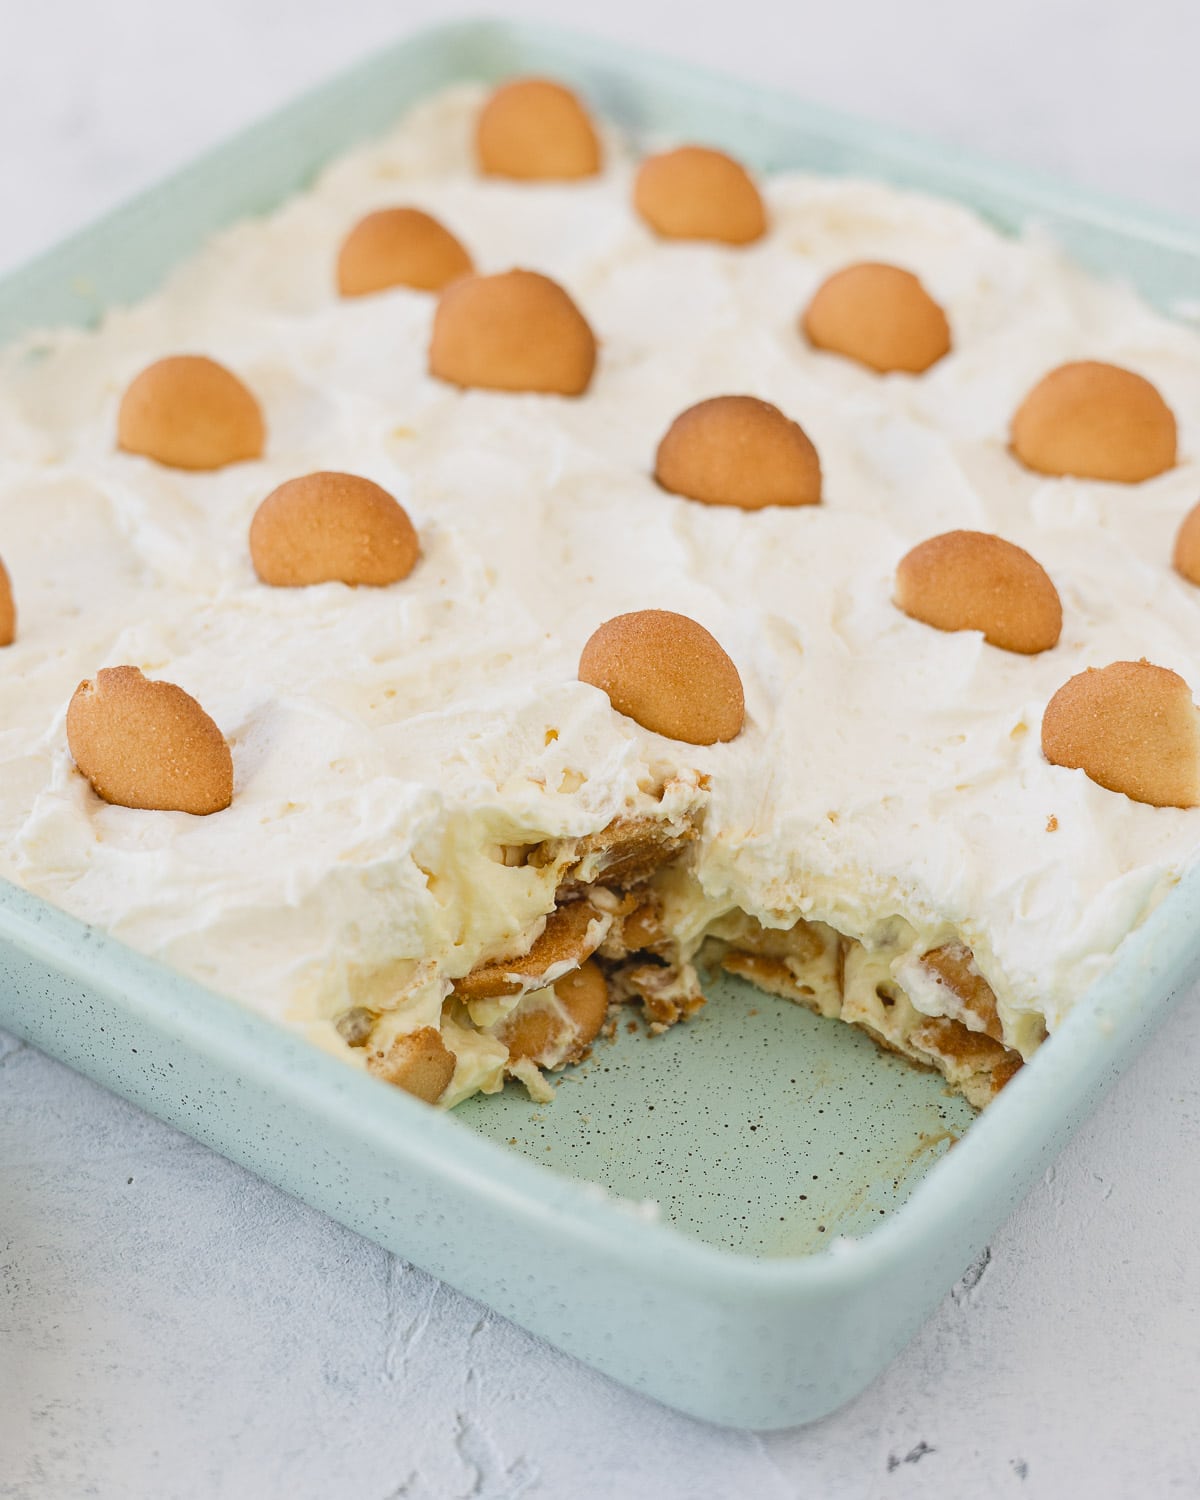 A robin's egg blue 8x8 pan with a slice of no bake banana pudding removed.